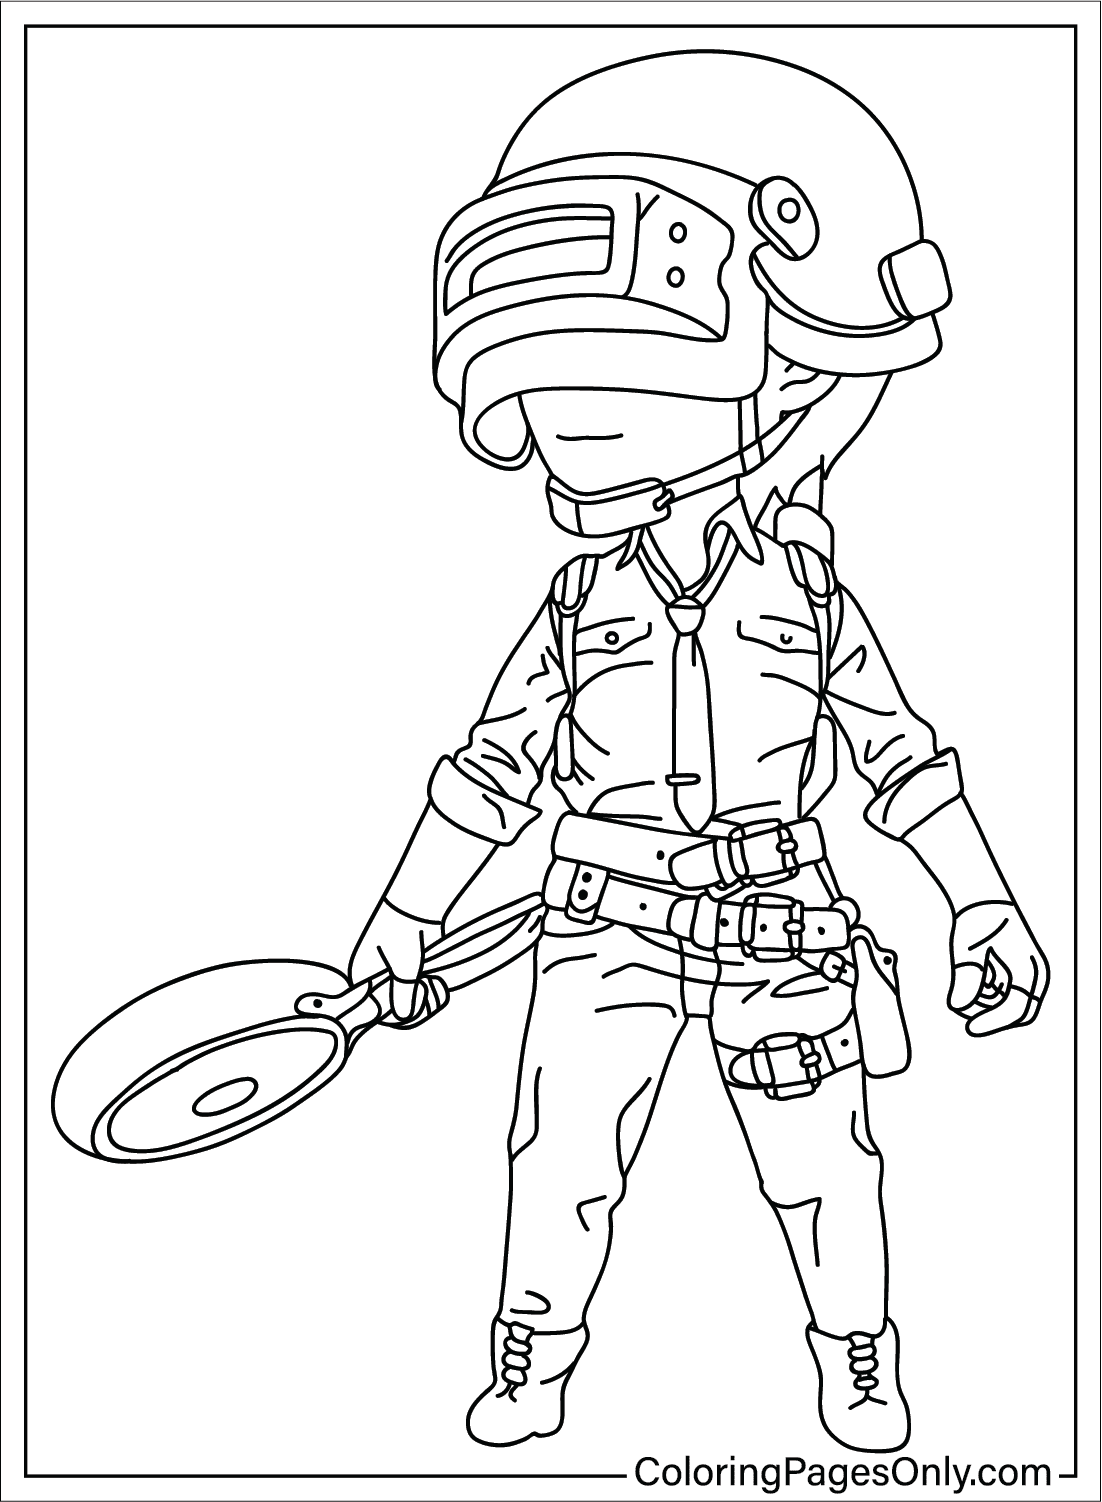 Coloring Sheet Pubg from PUBG